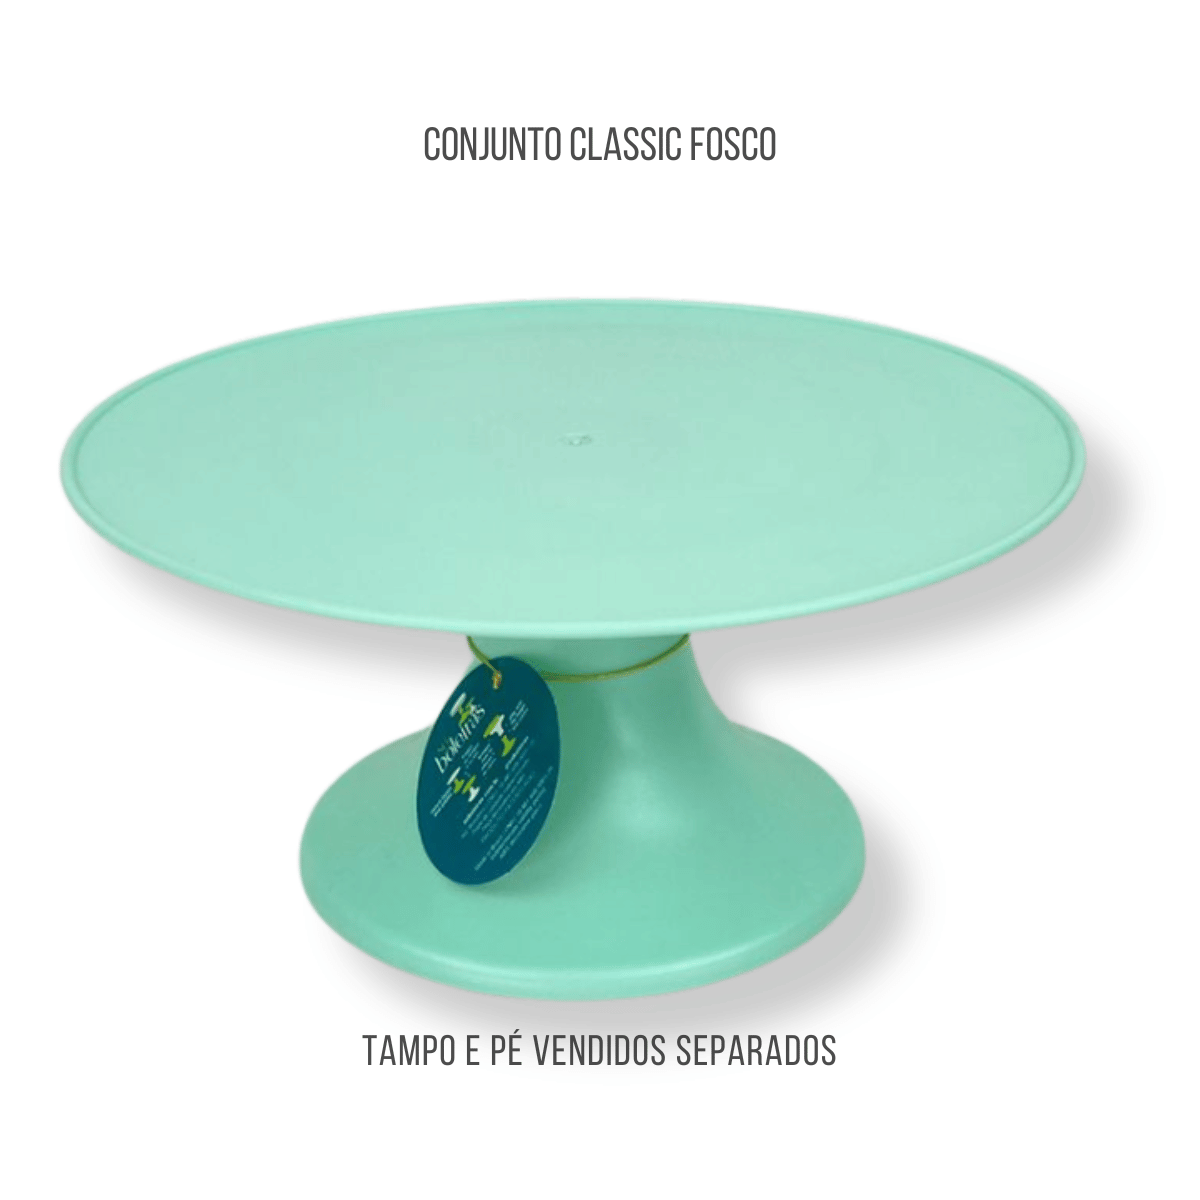 Light green classic cake stand 4.5inx9in/220mmx135mm